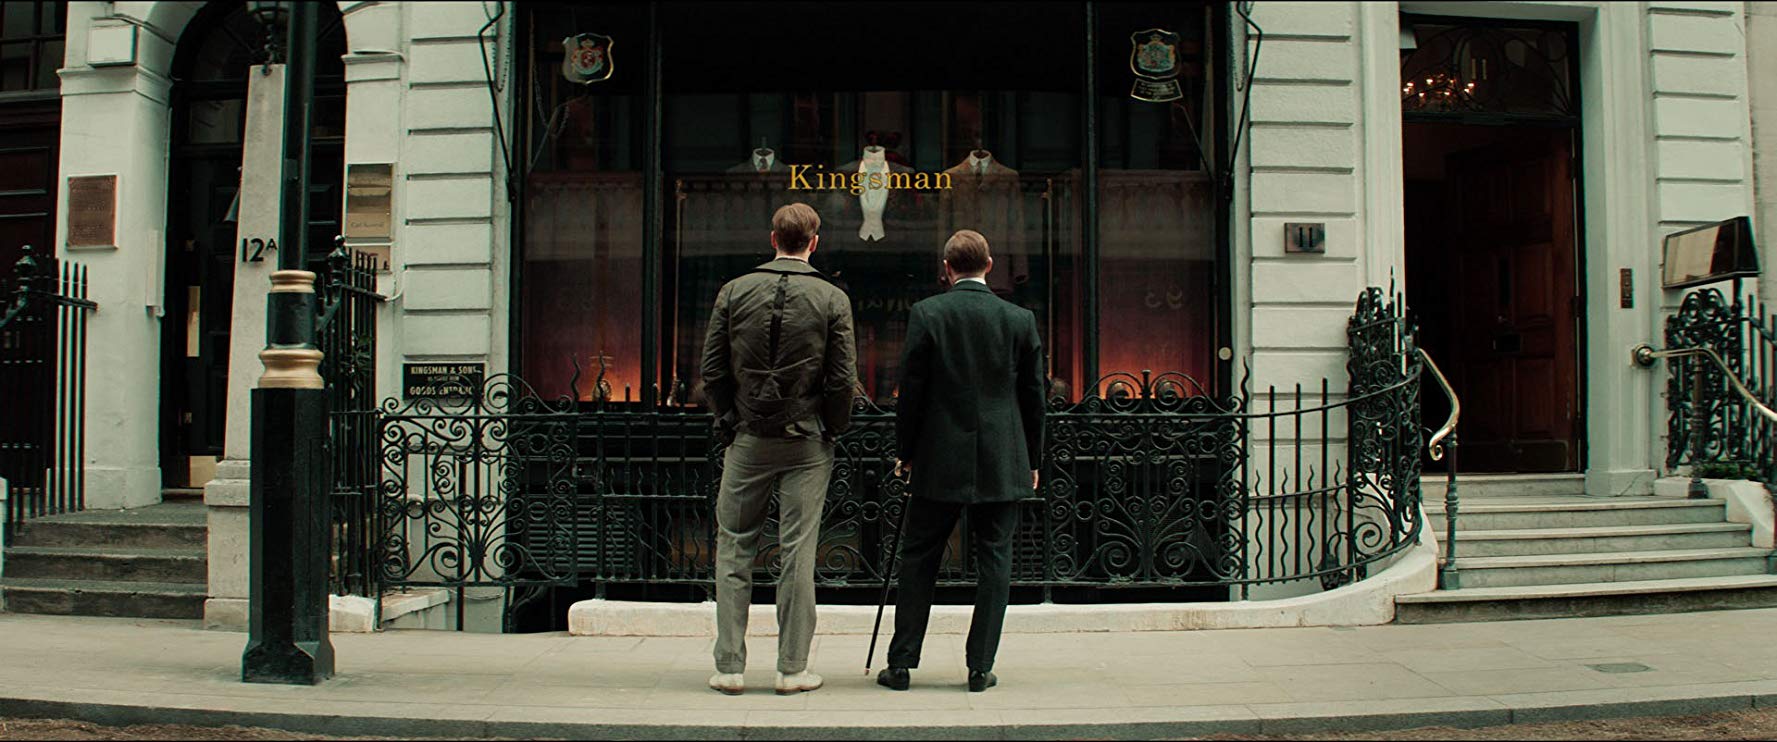 Ralph Fiennes is seen as the Duke of Oxford in a still image from “The King’s Man”.